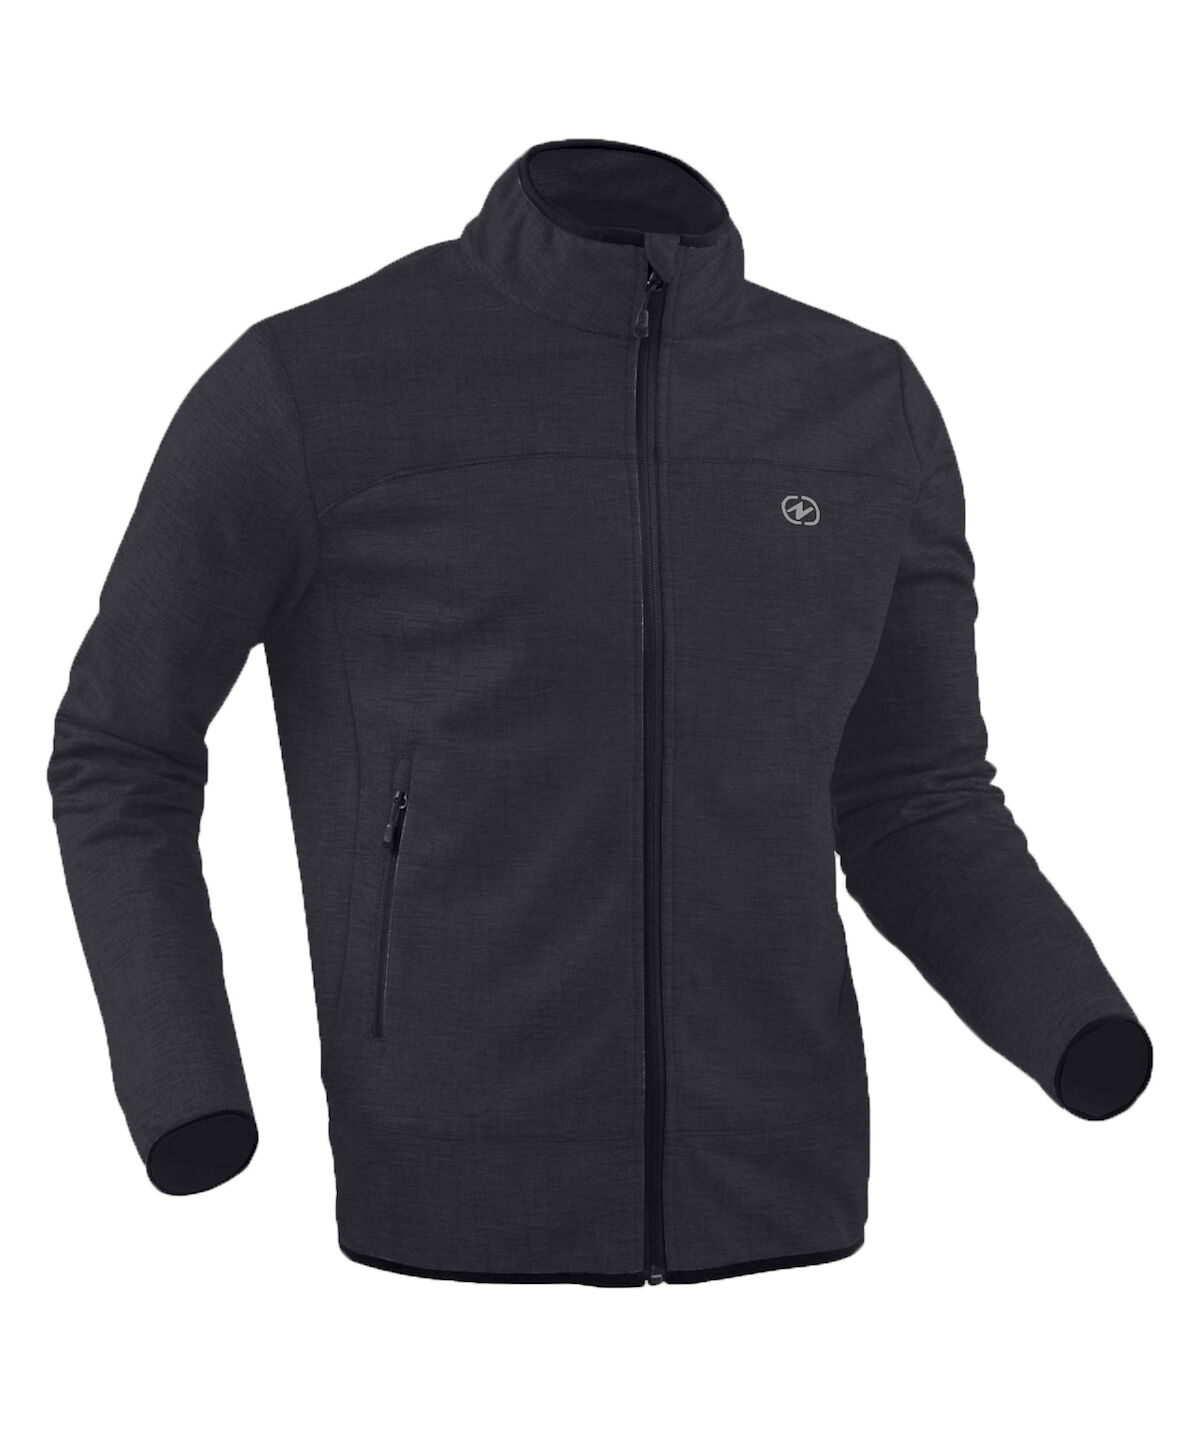 Damart Sport - Waterproof and breathable Softshell jacket - Chaqueta softshell - Hombre